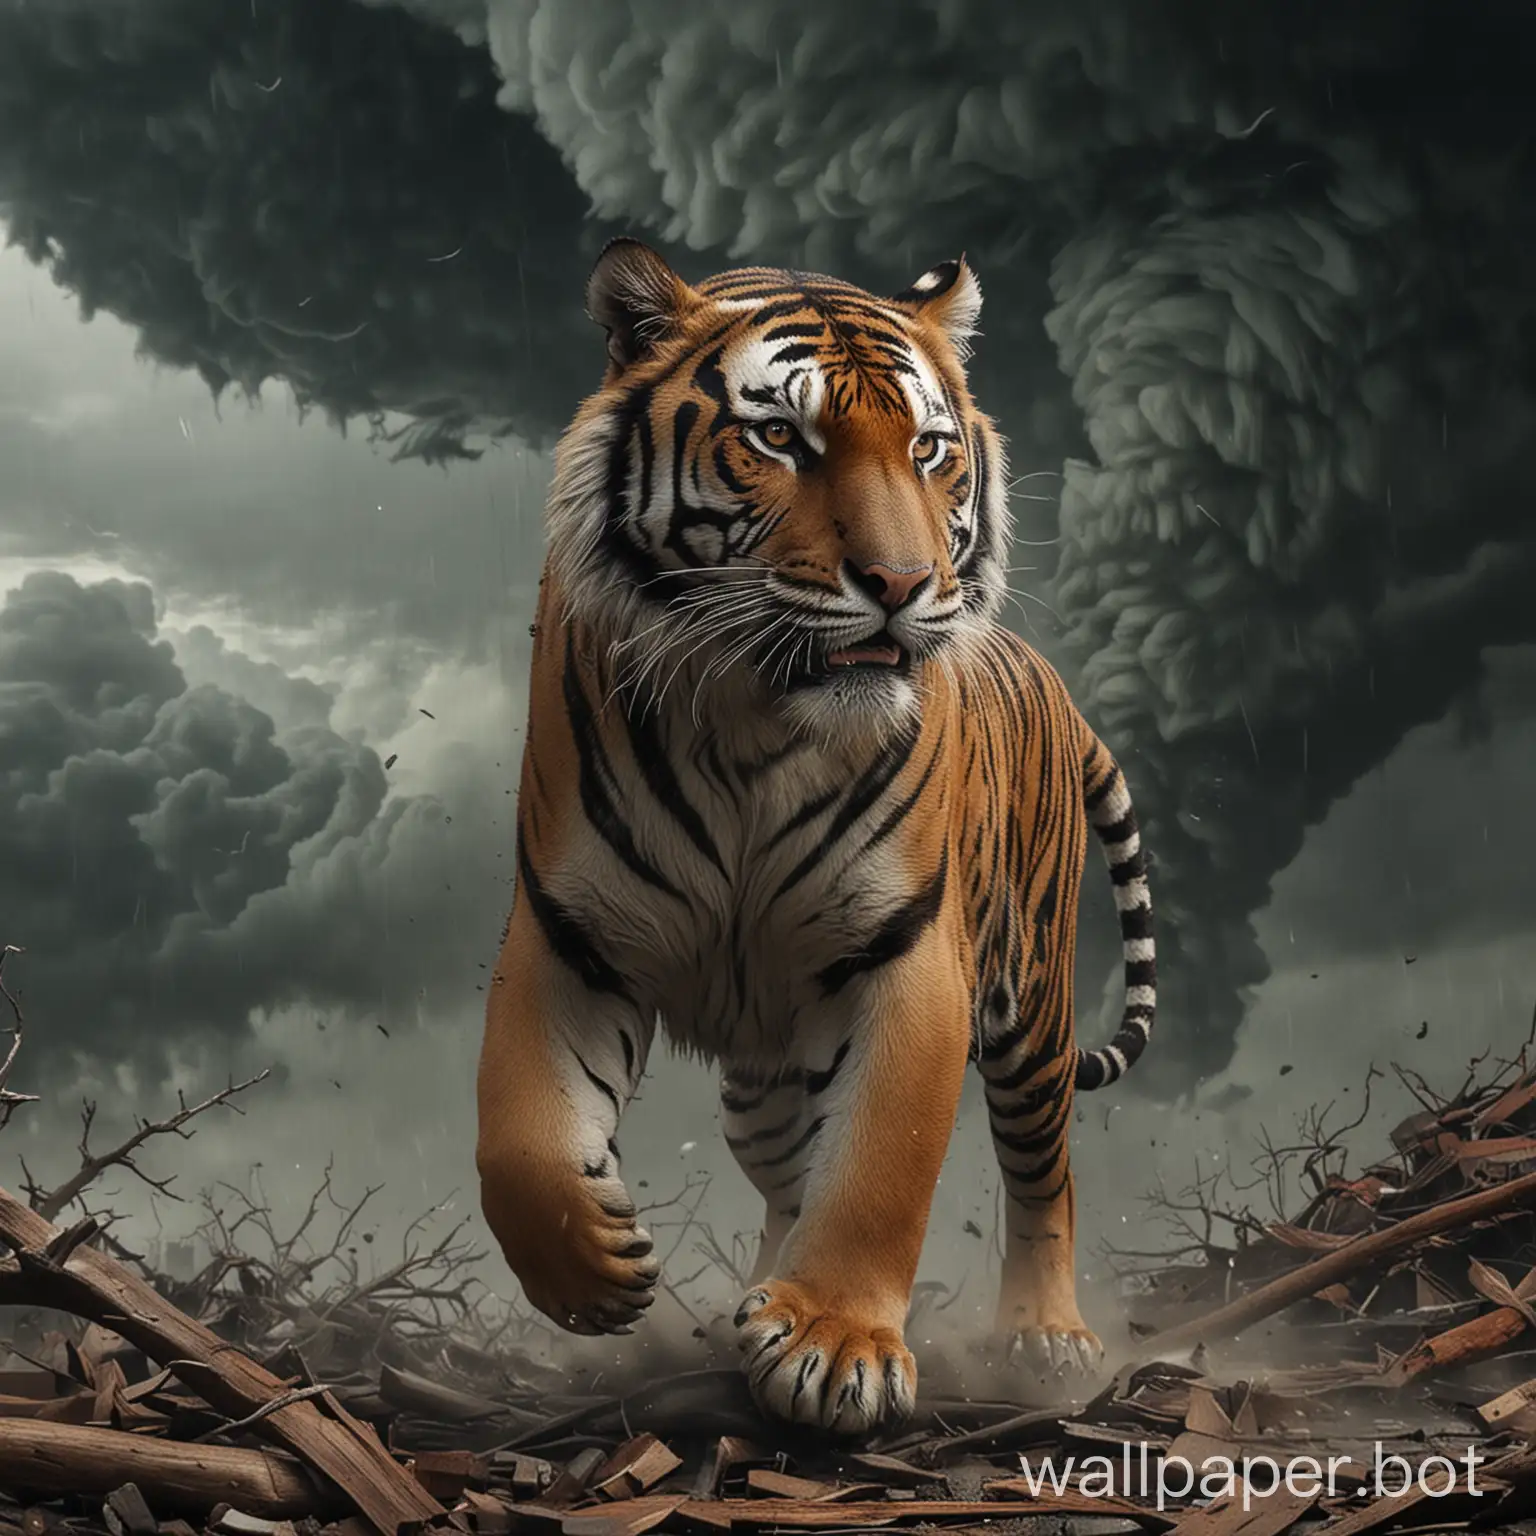 generate a tiger animal in the midst of a tornado, ultra realistic